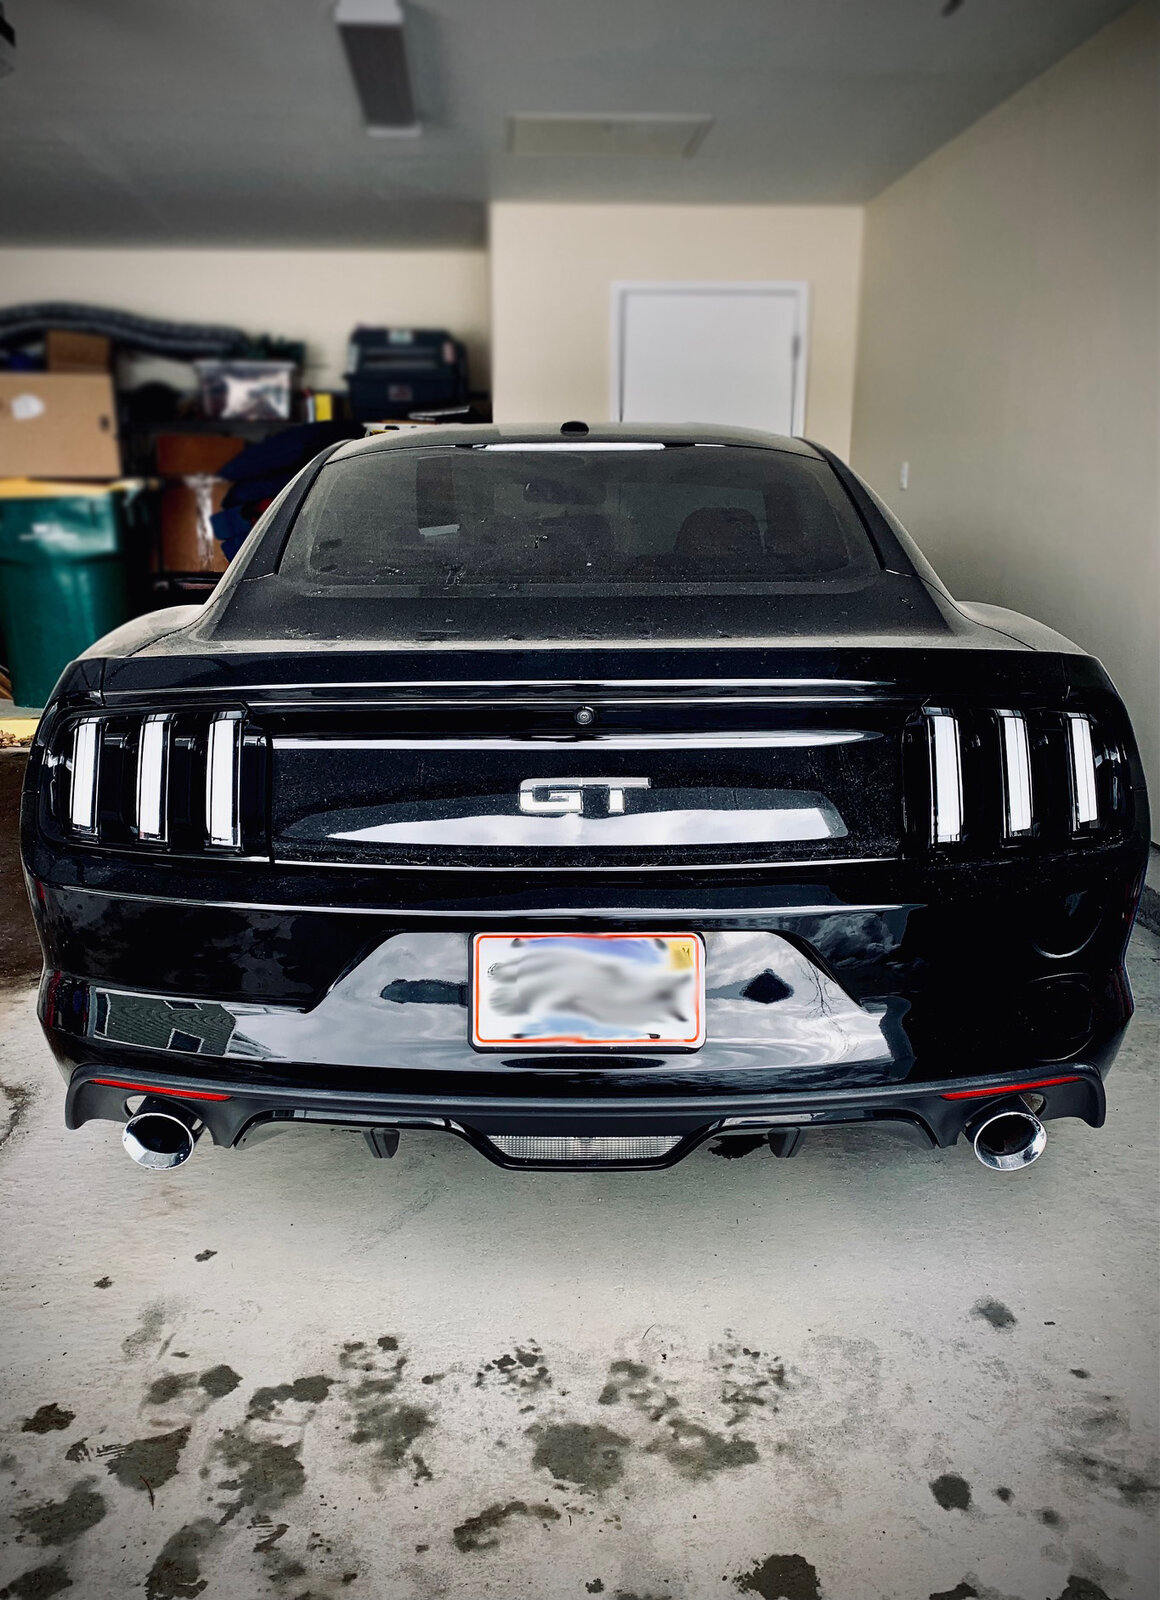 Euro Tail Lights on Black ‘16 PP GT | 2015+ S550 Mustang Forum (GT